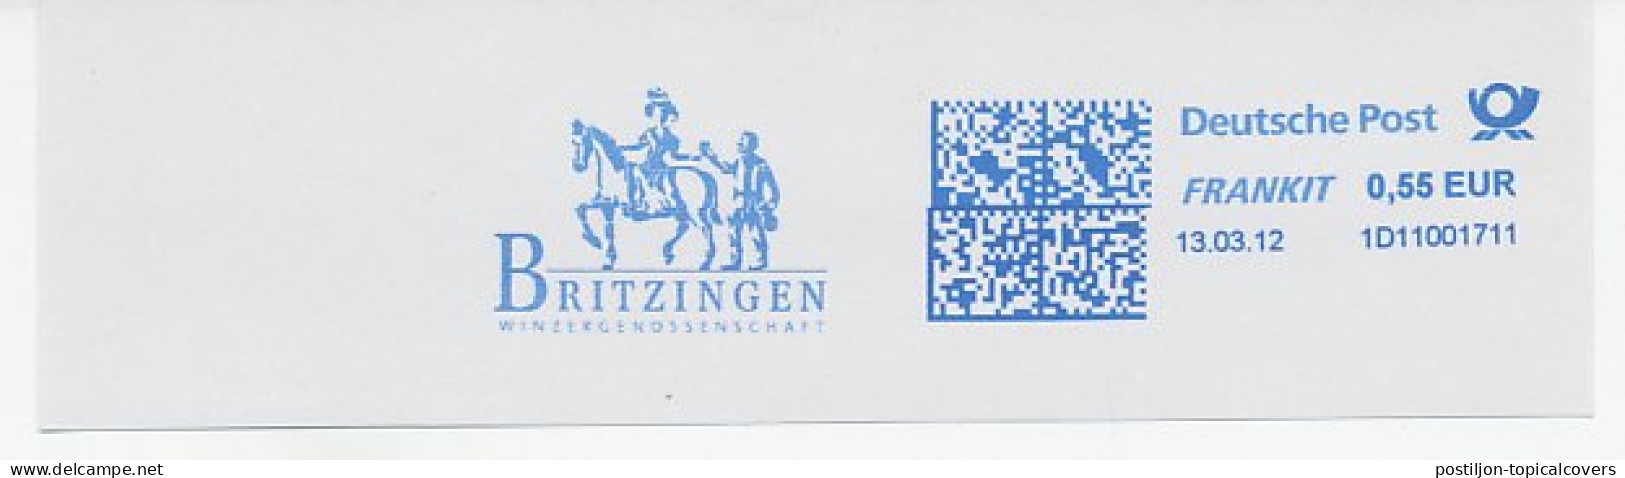 Meter Cut Germany 2012 Horse - Ippica